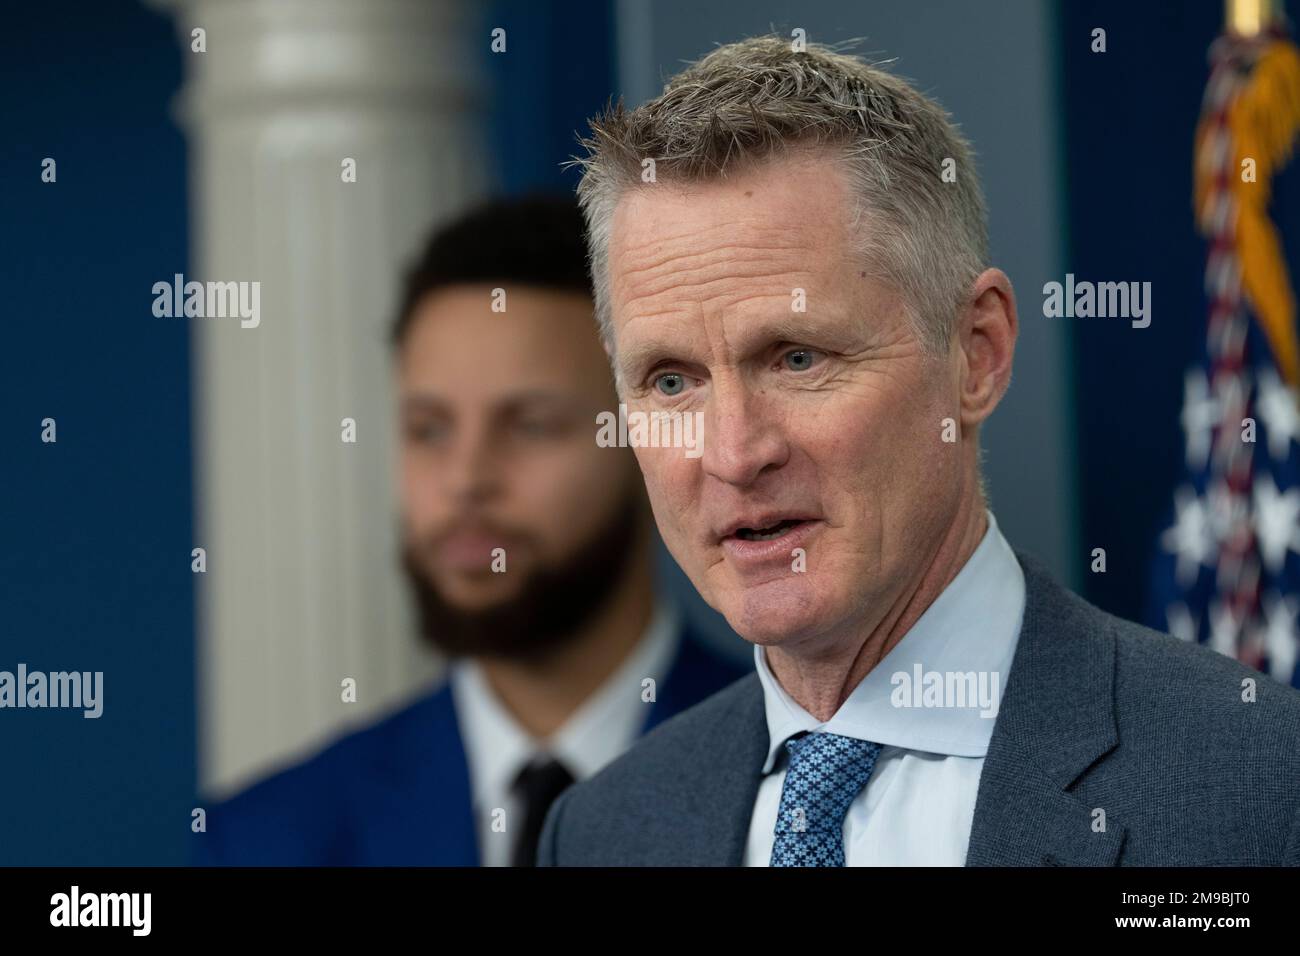 Golden State Warriors head coach Steve Kerr makes a statement during the daily briefing at the White House in Washington, DC, Tuesday, January 17, 2023.Credit: Chris Kleponis/CNP /MediaPunch Stock Photo